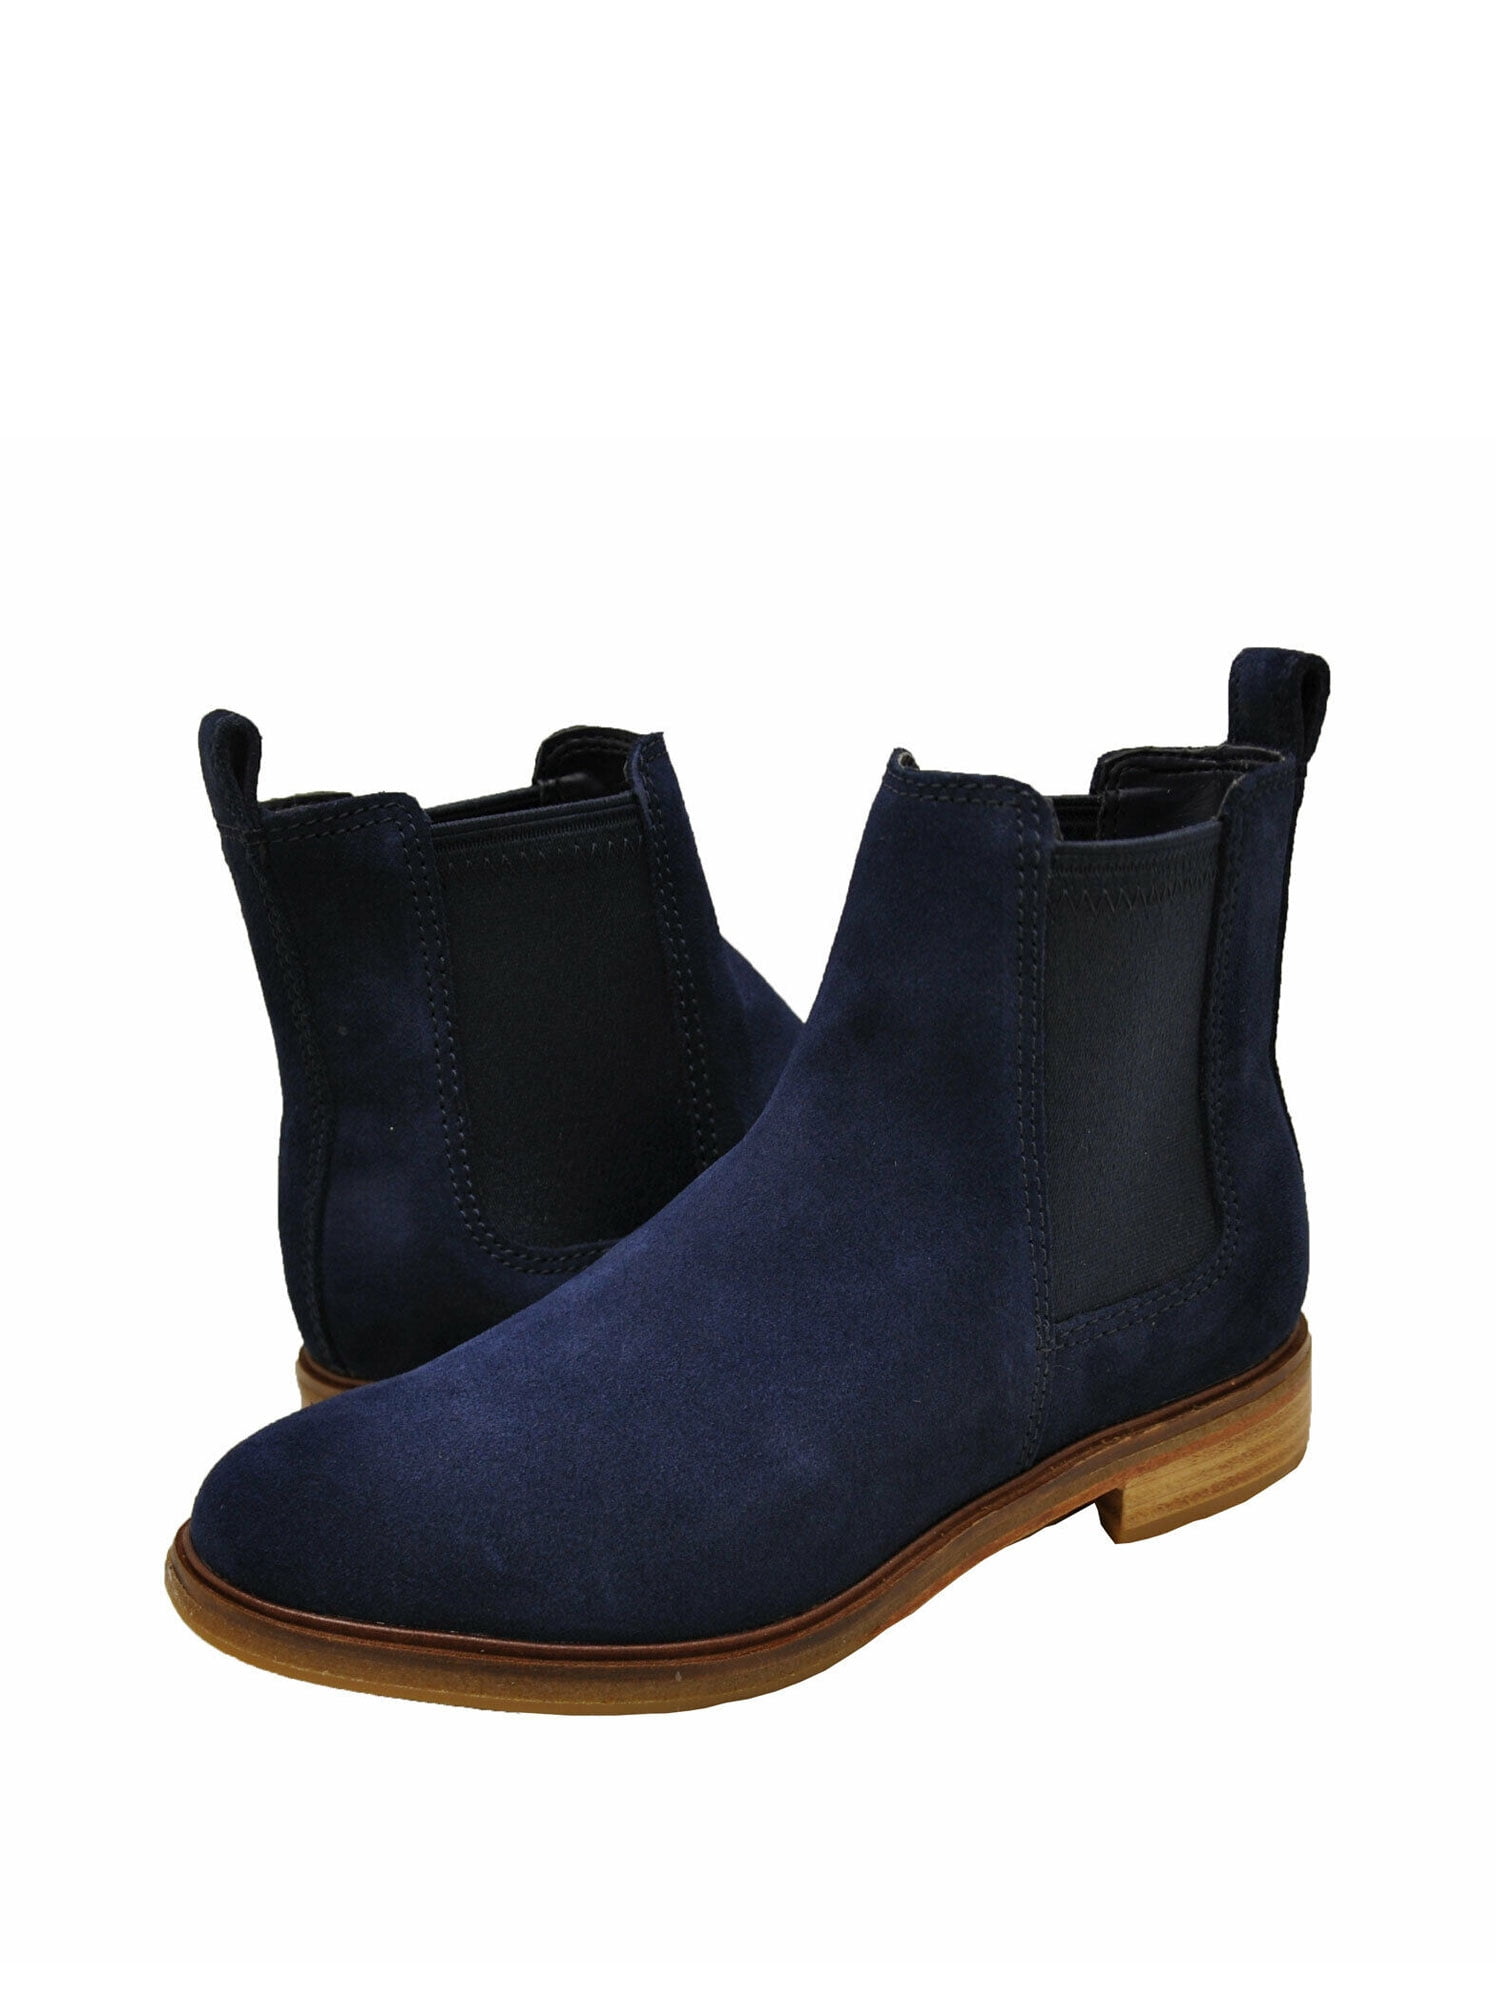 Ladies Clarks Casual Slip-On Ankle Boots Clarkdale Arlo 